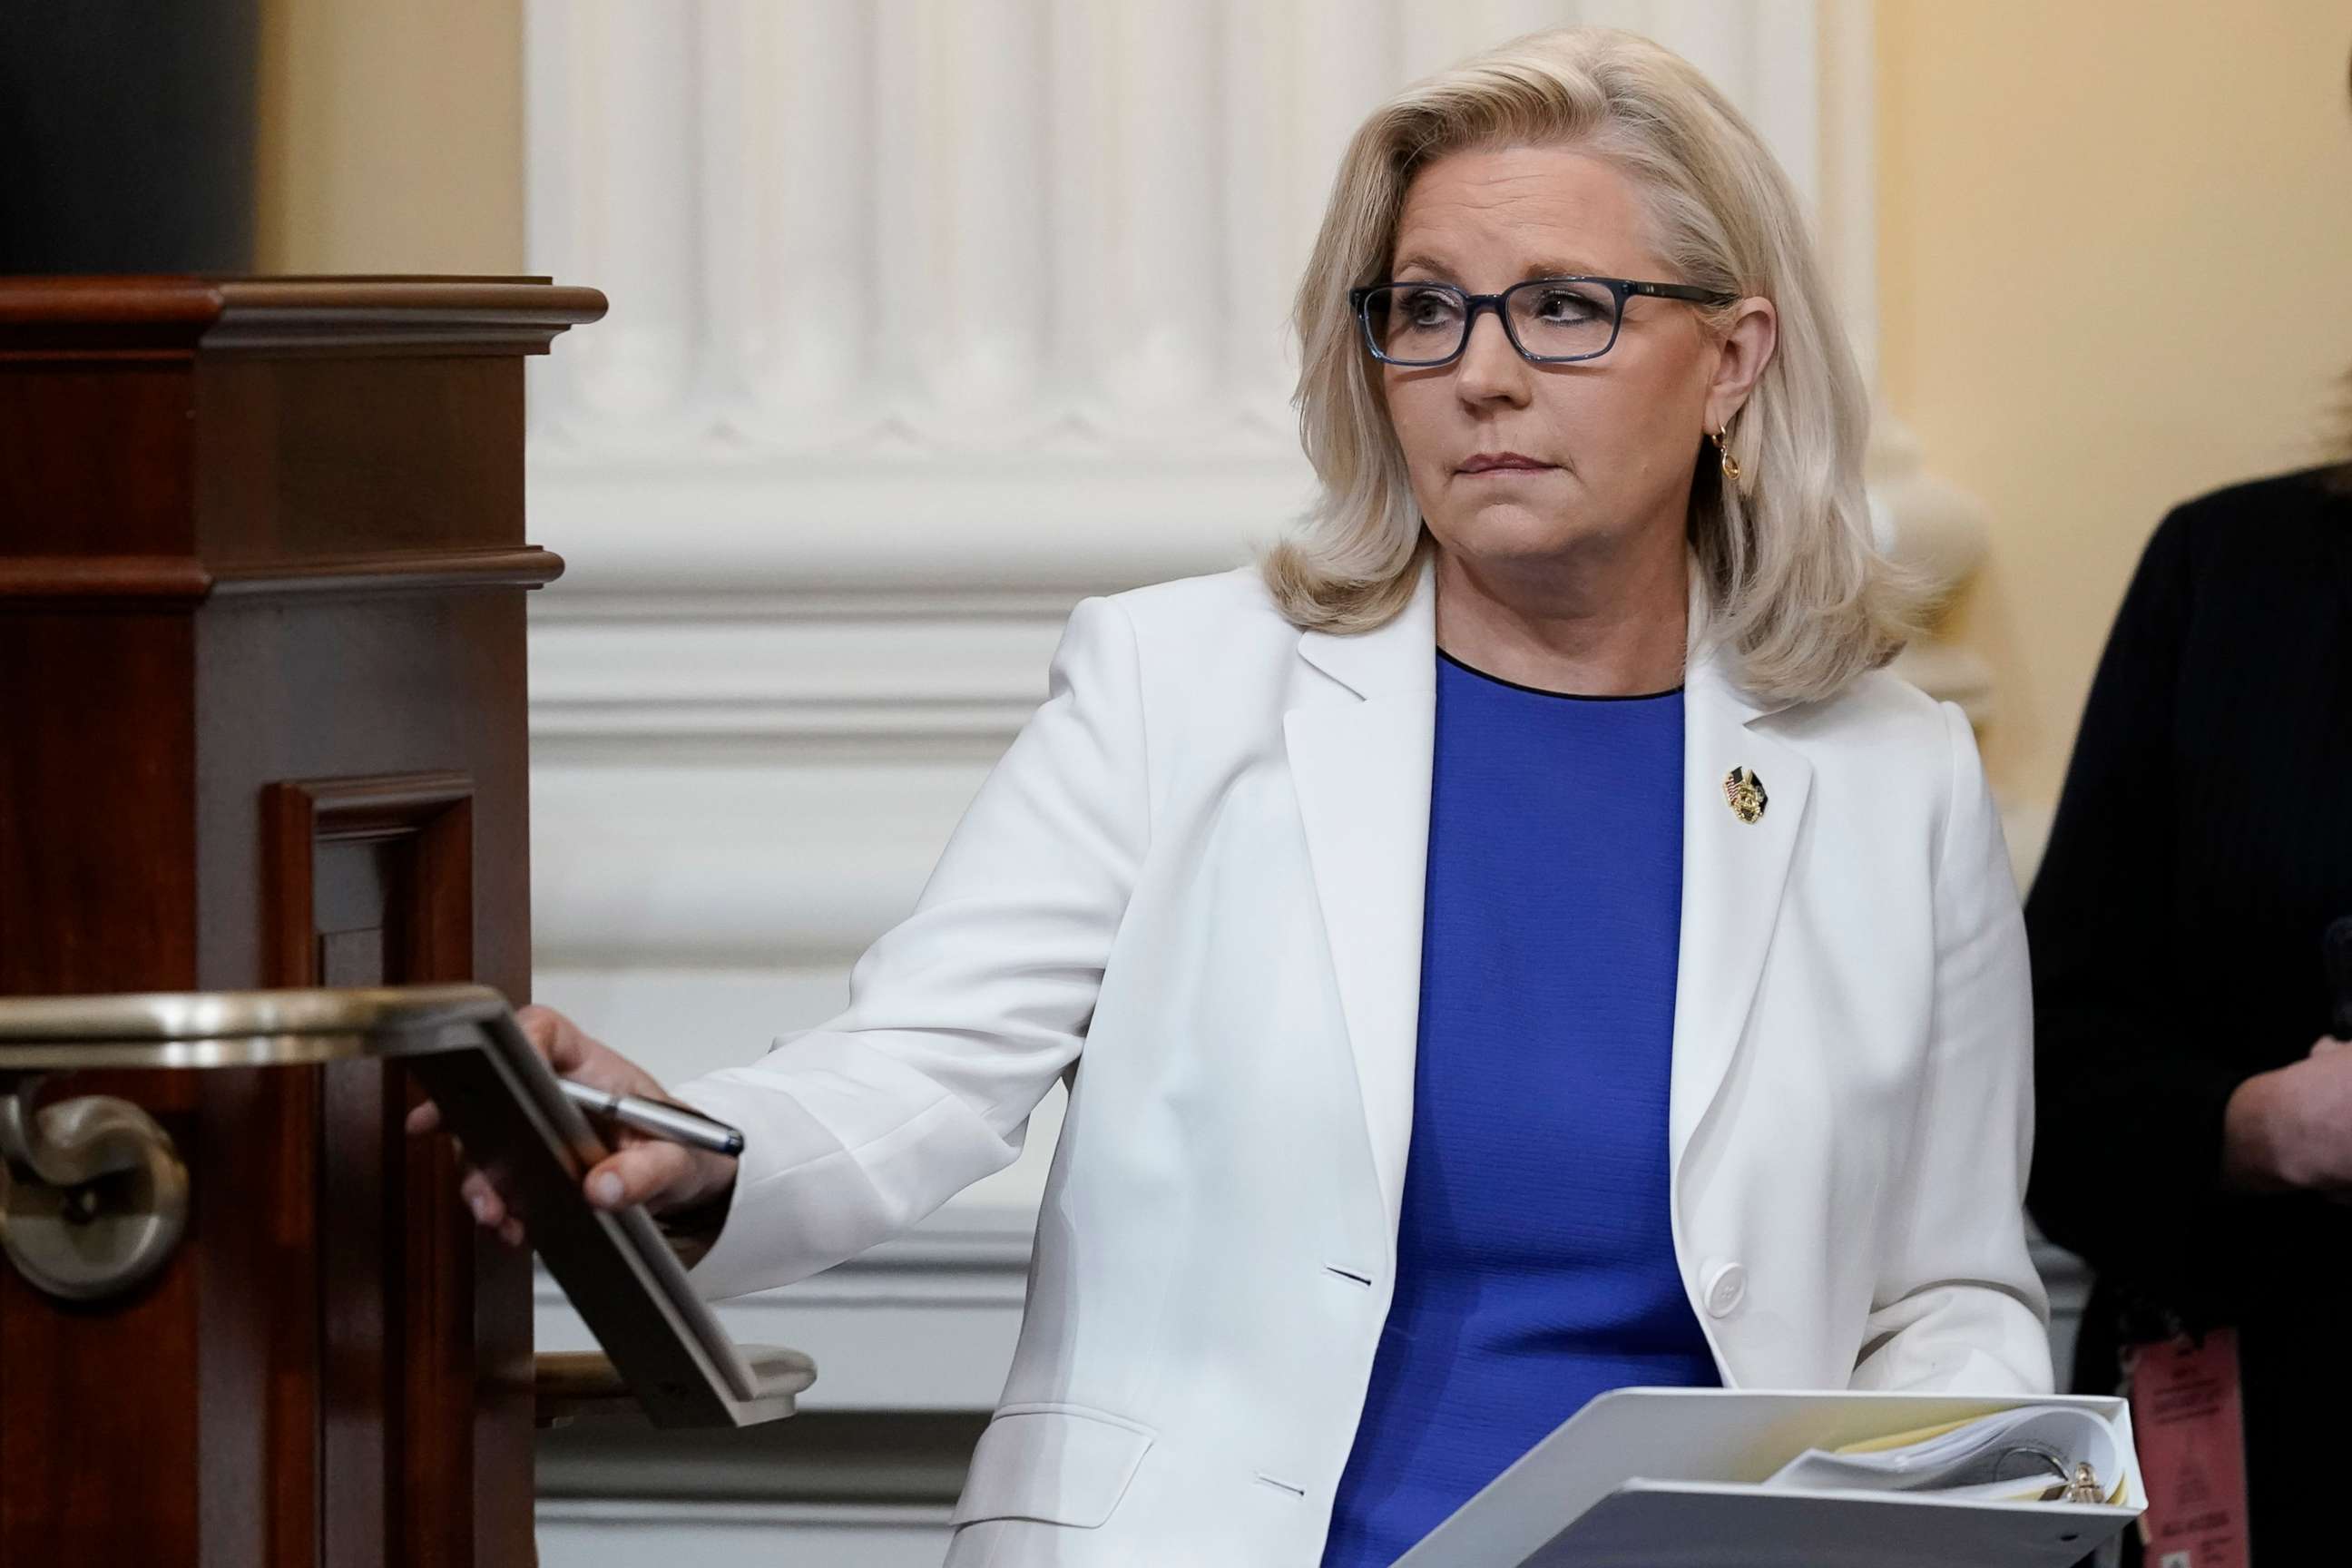 PHOTO: In this July 21, 2022, file photo, Vice Chair Liz Cheney arrives after a break as the House select committee investigating the Jan. 6 attack on the U.S. Capitol holds a hearing at the Capitol in Washington, D.C.